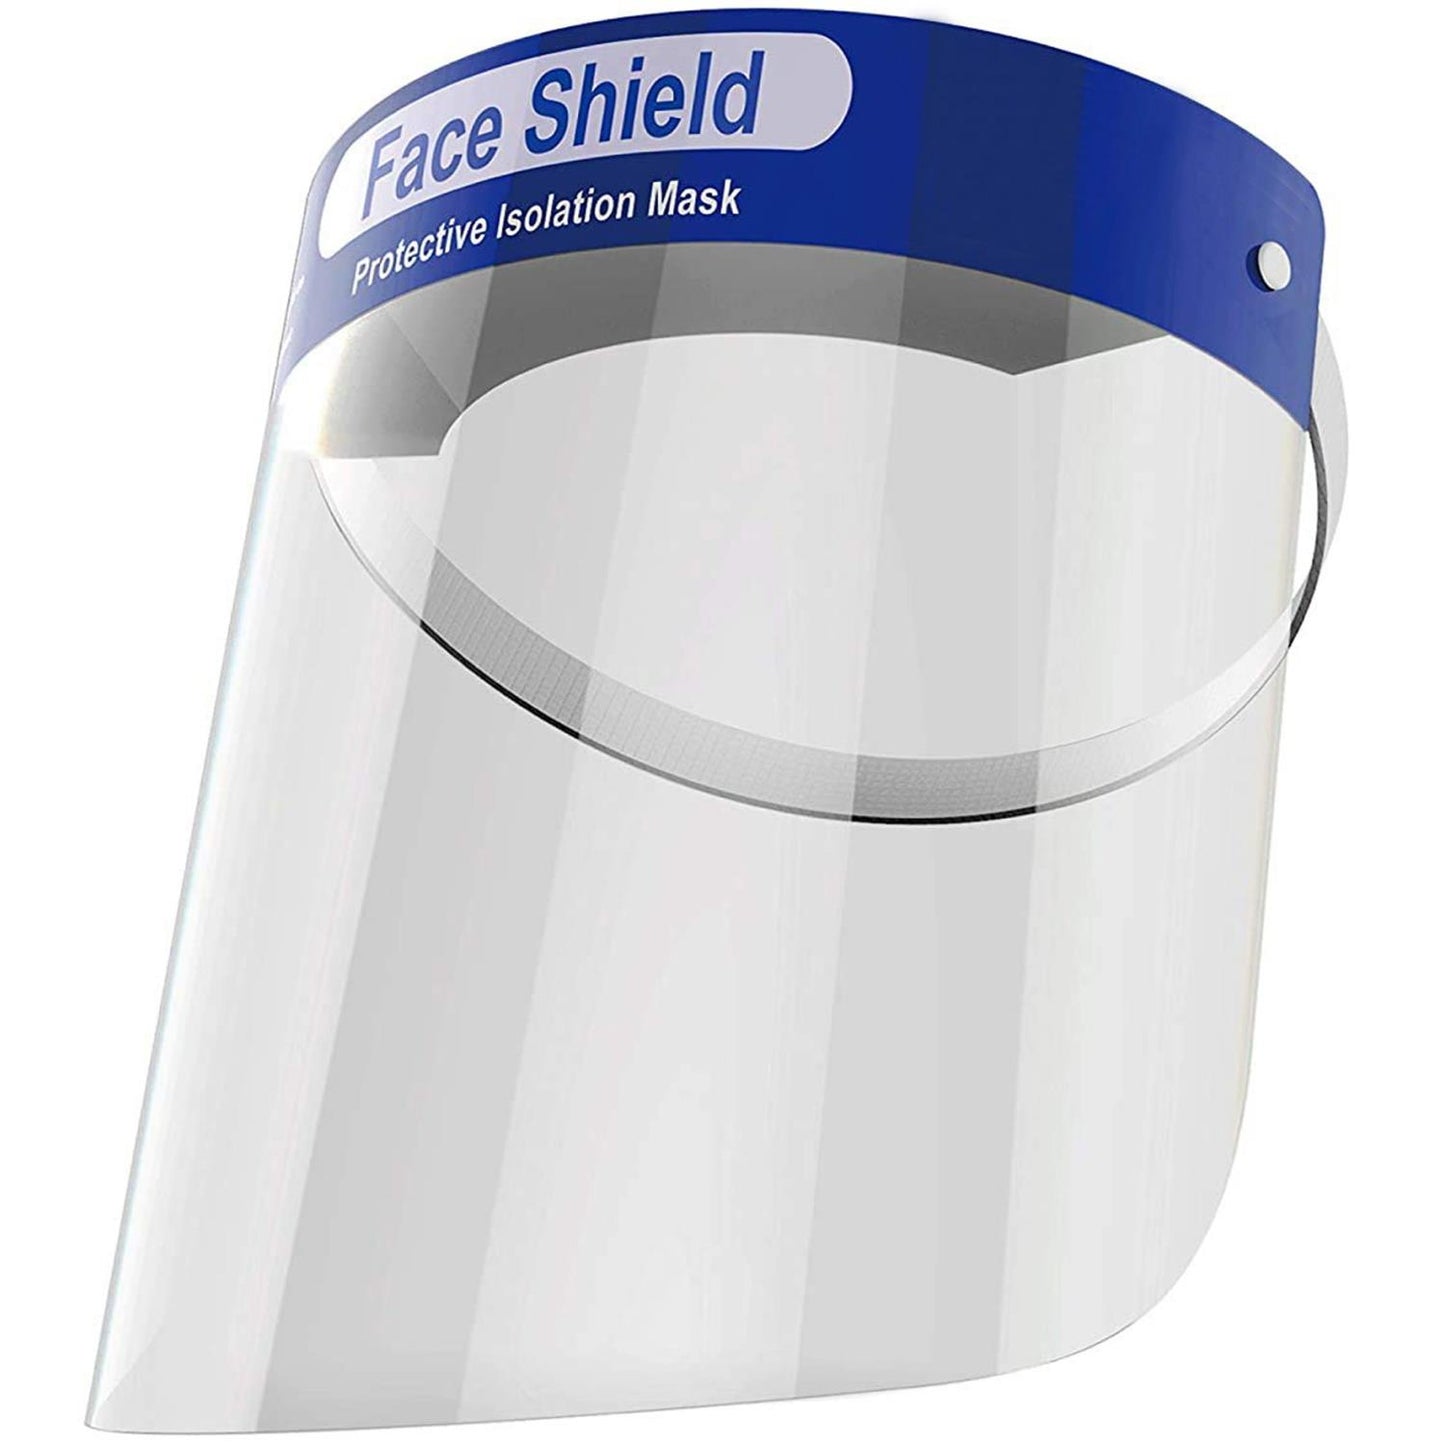 Stay Safe Anywhere with a Face Shield Protective Isolation Mask